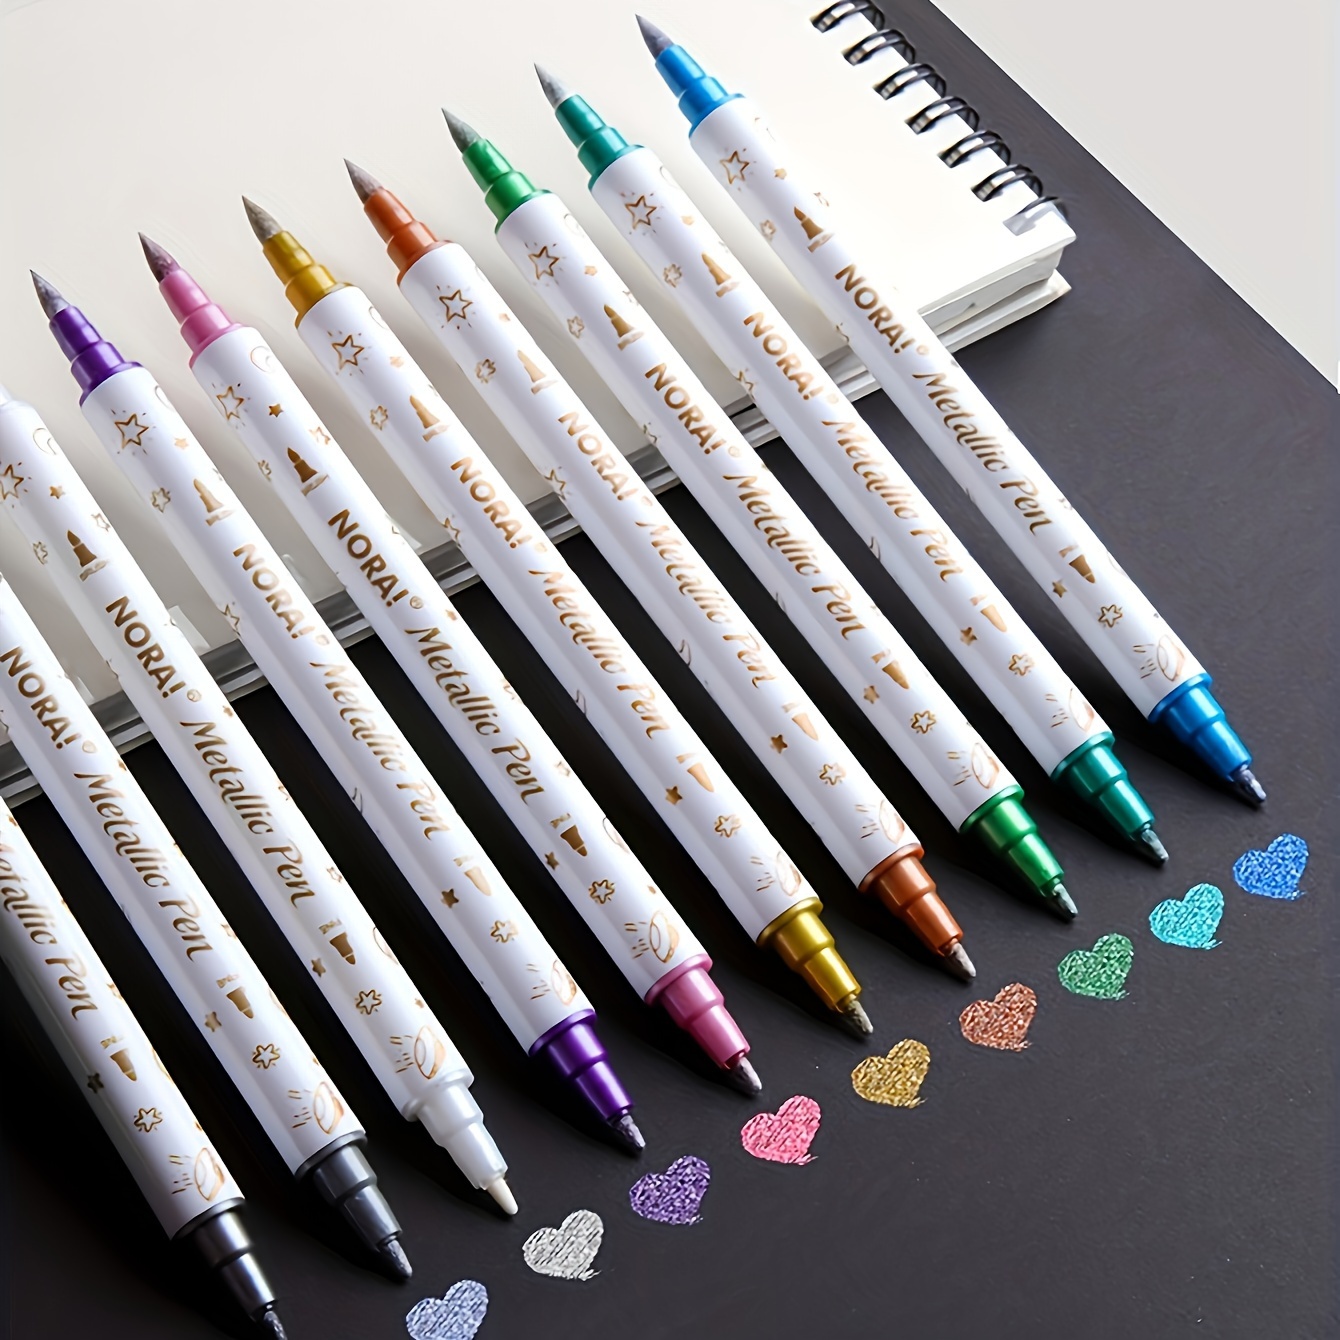 Shimmer Markers Doodle Outline Dazzles: 12 Colors Glitter Double Line  Metallic Pen Set Super Squiggles Sparkle Cool Fun Fancy Self Sparkly  Dazzlers